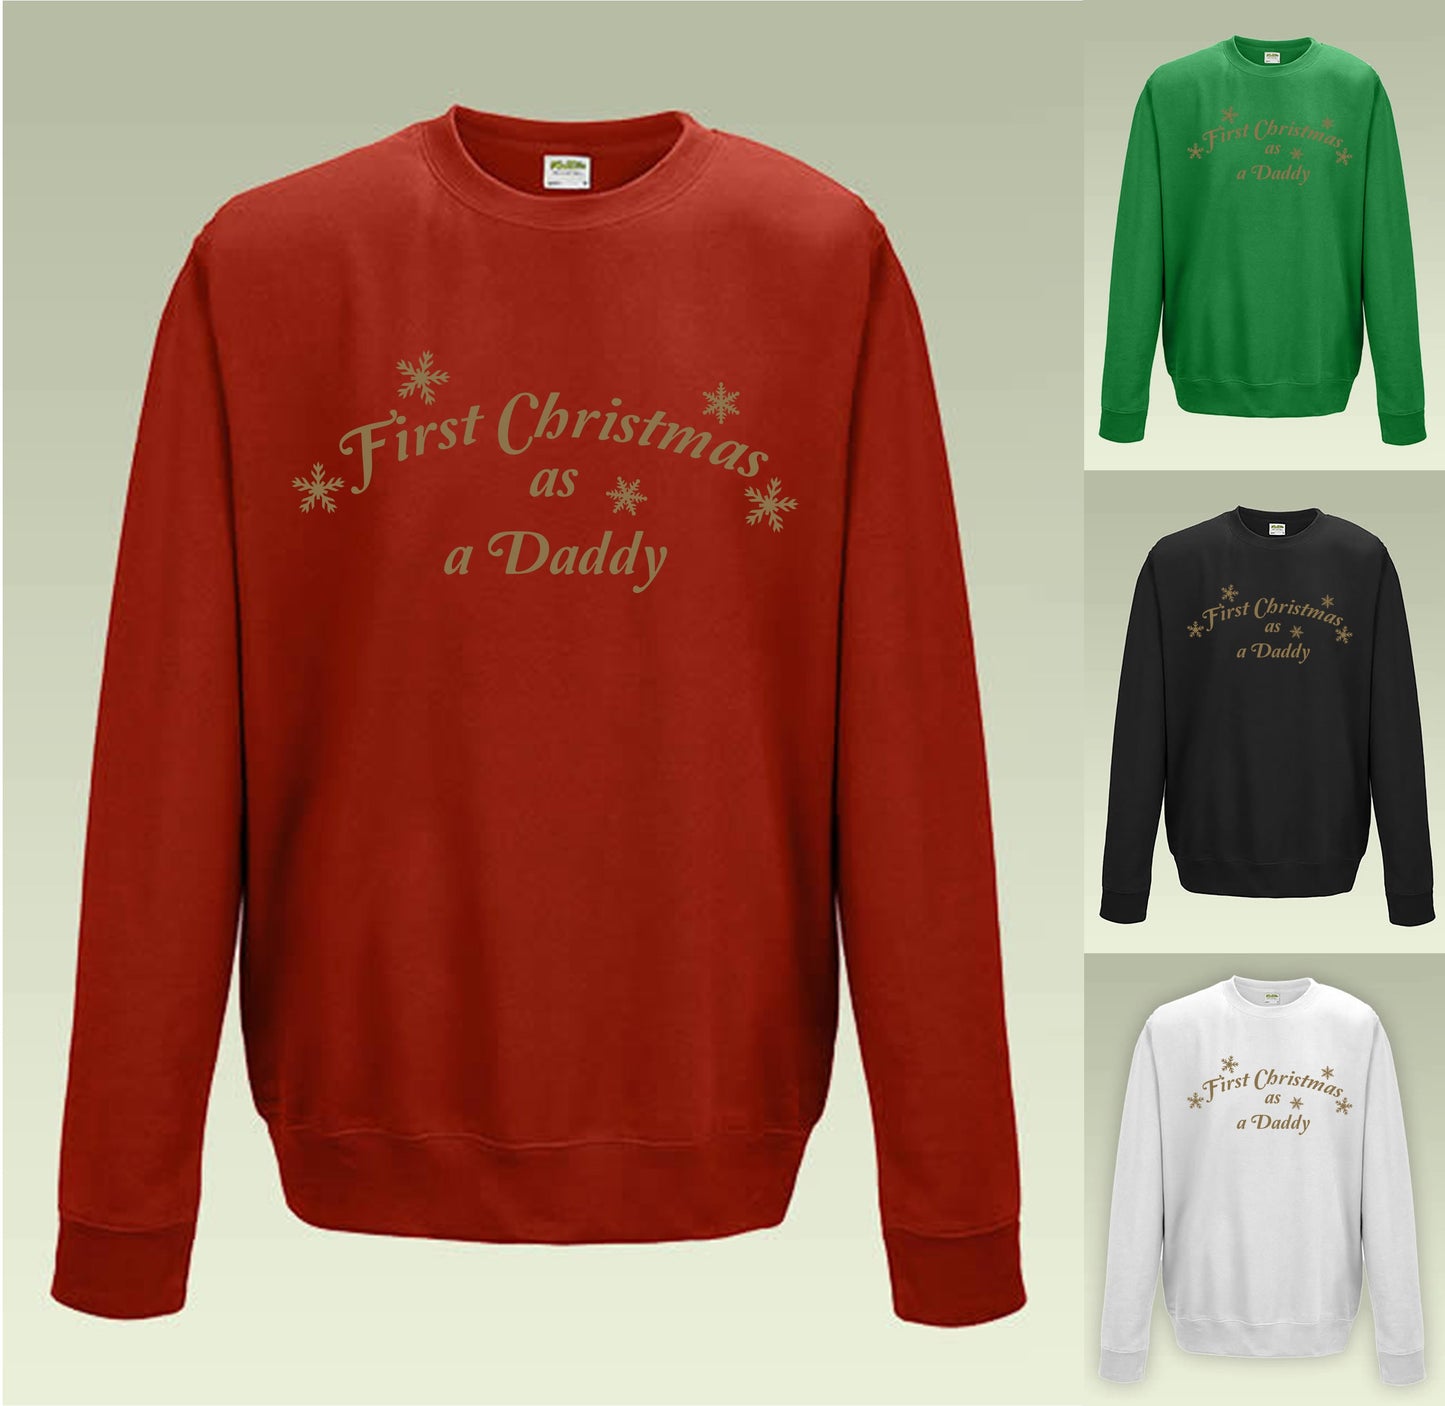 First Christmas a Daddy Sweatshirt JH030 Funny Jumper Sweater - We can change to Dad or any other variation